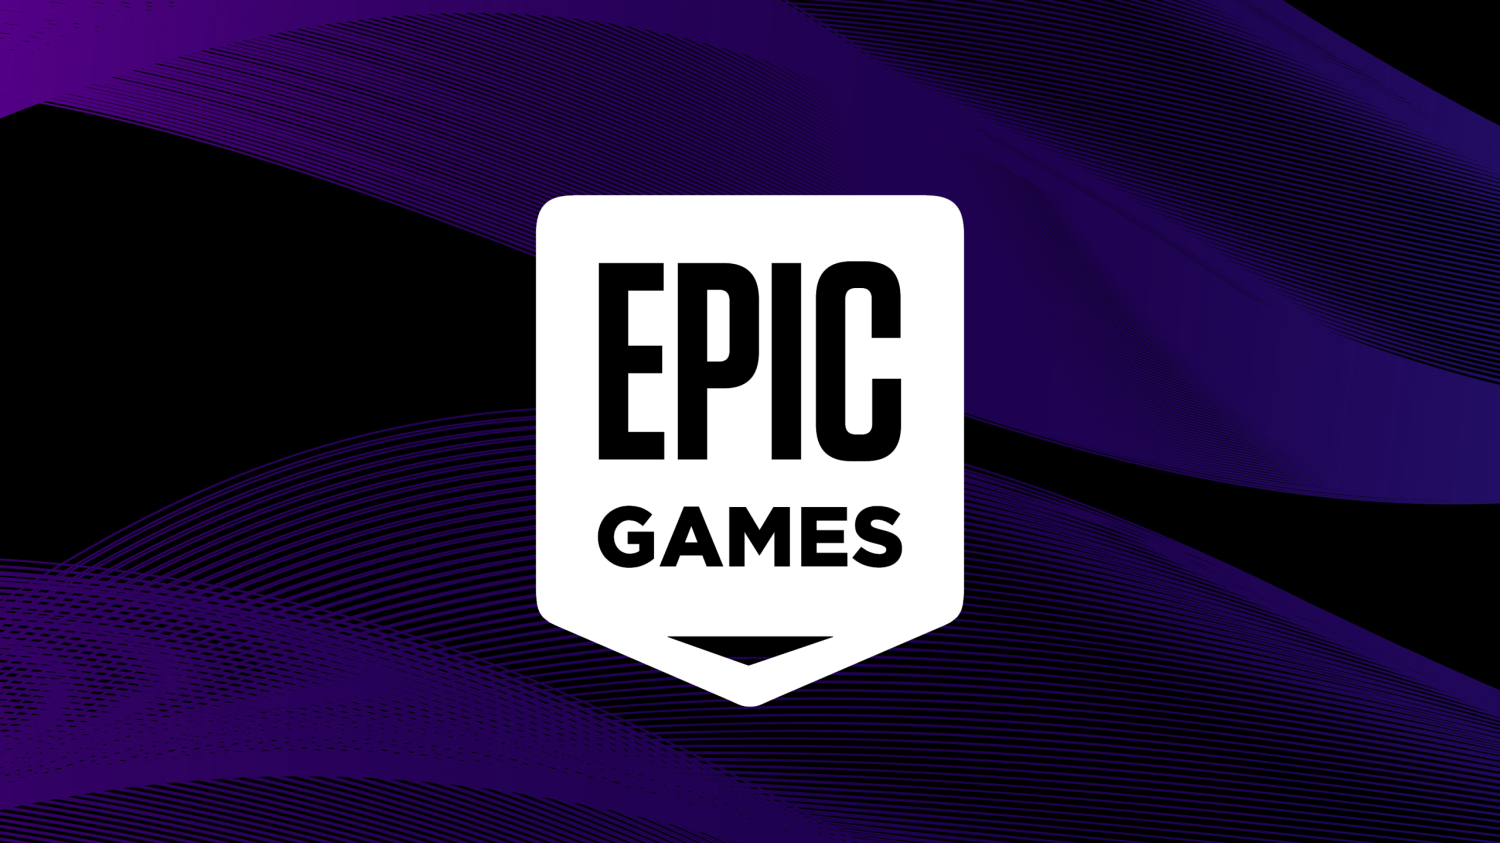 Epic Games nearly doubles its valuation in 2 years